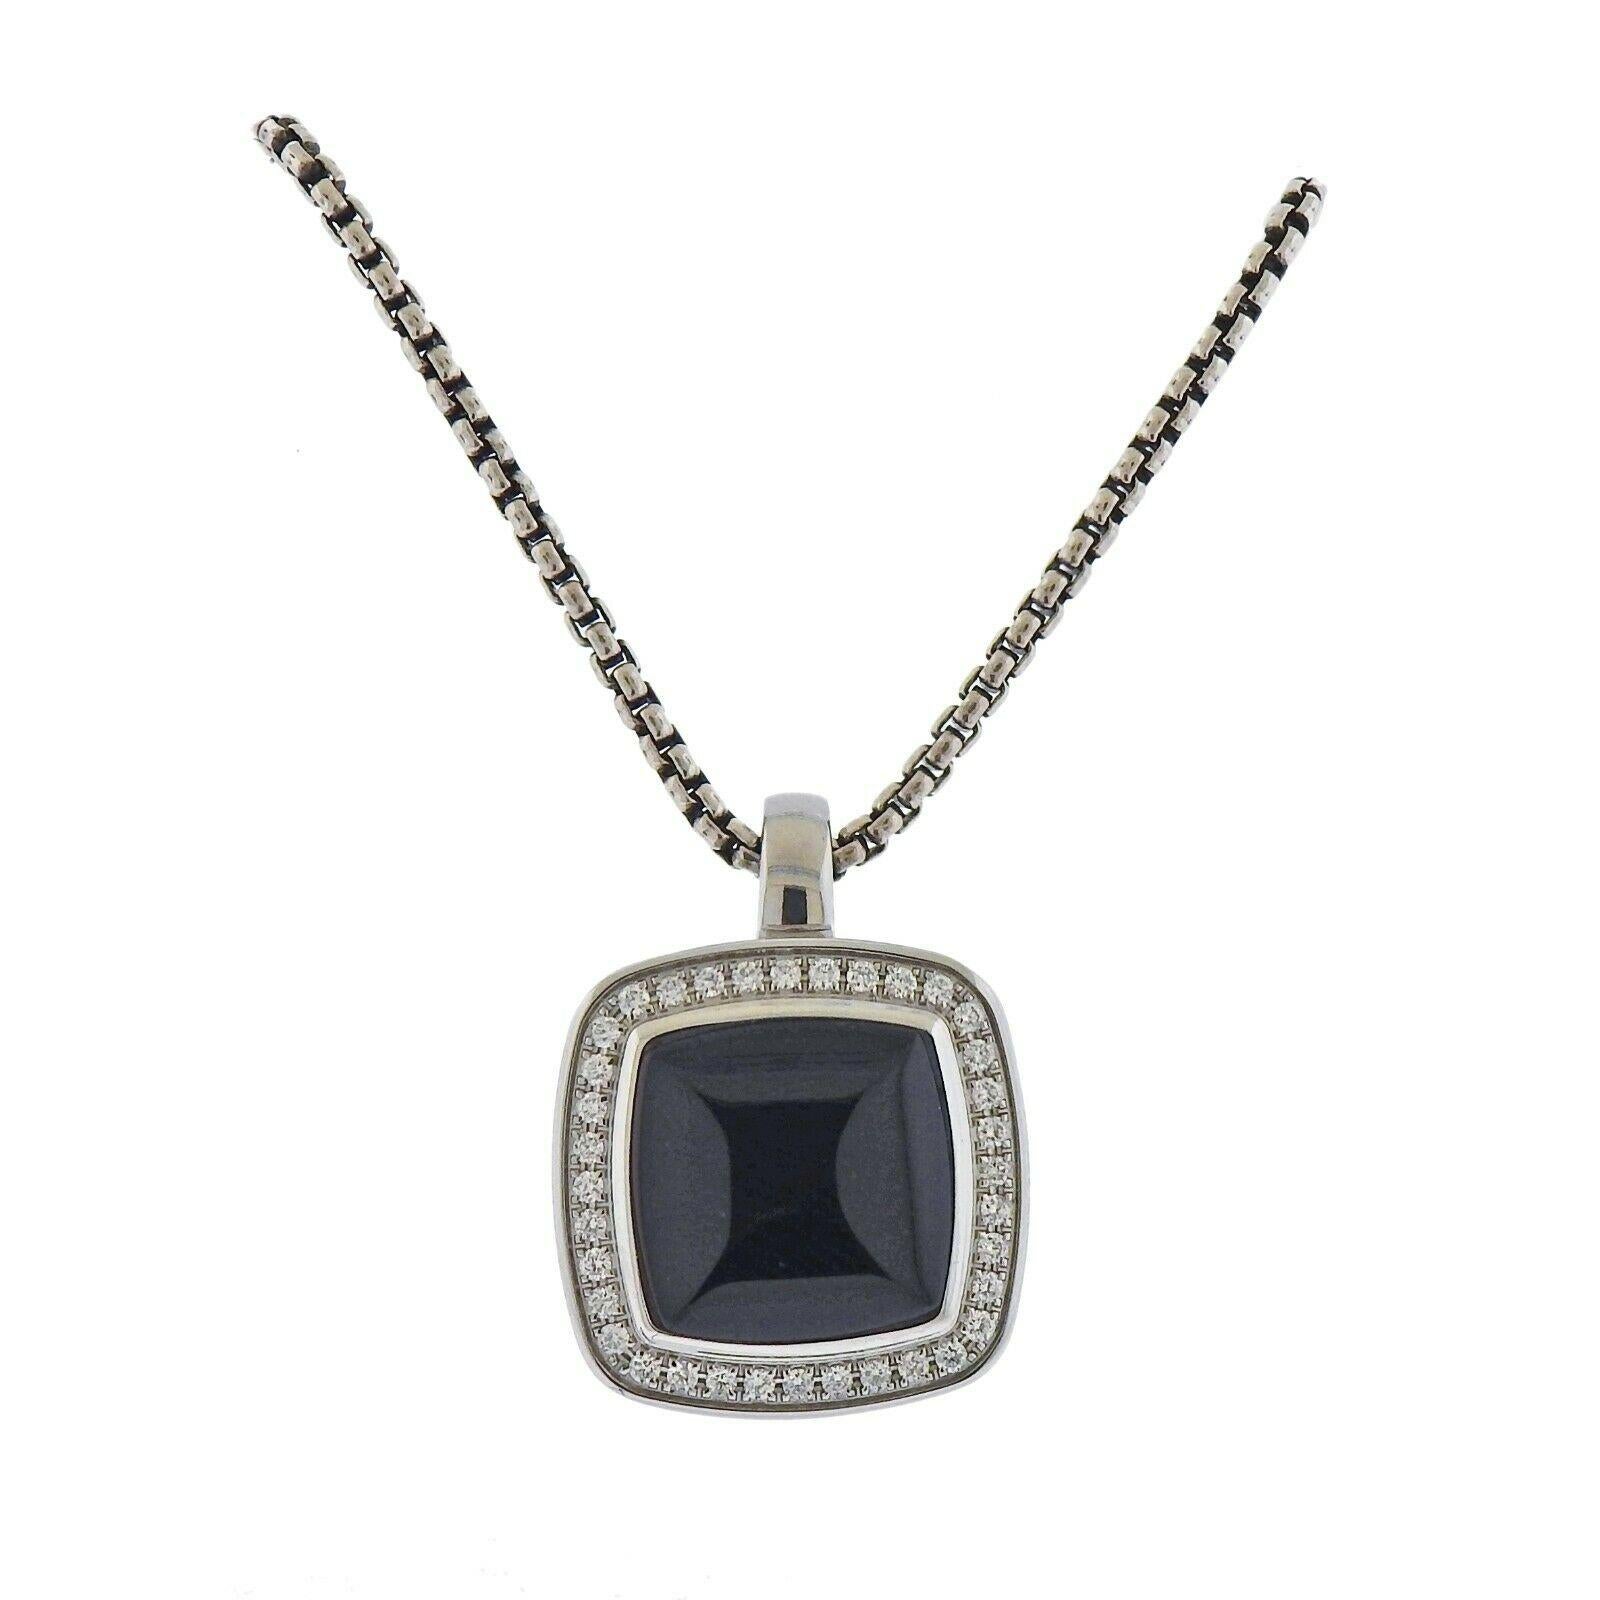 Brand new sterling silver onyx watch pendant by David Yurman for the Albion collection. Necklace is 34